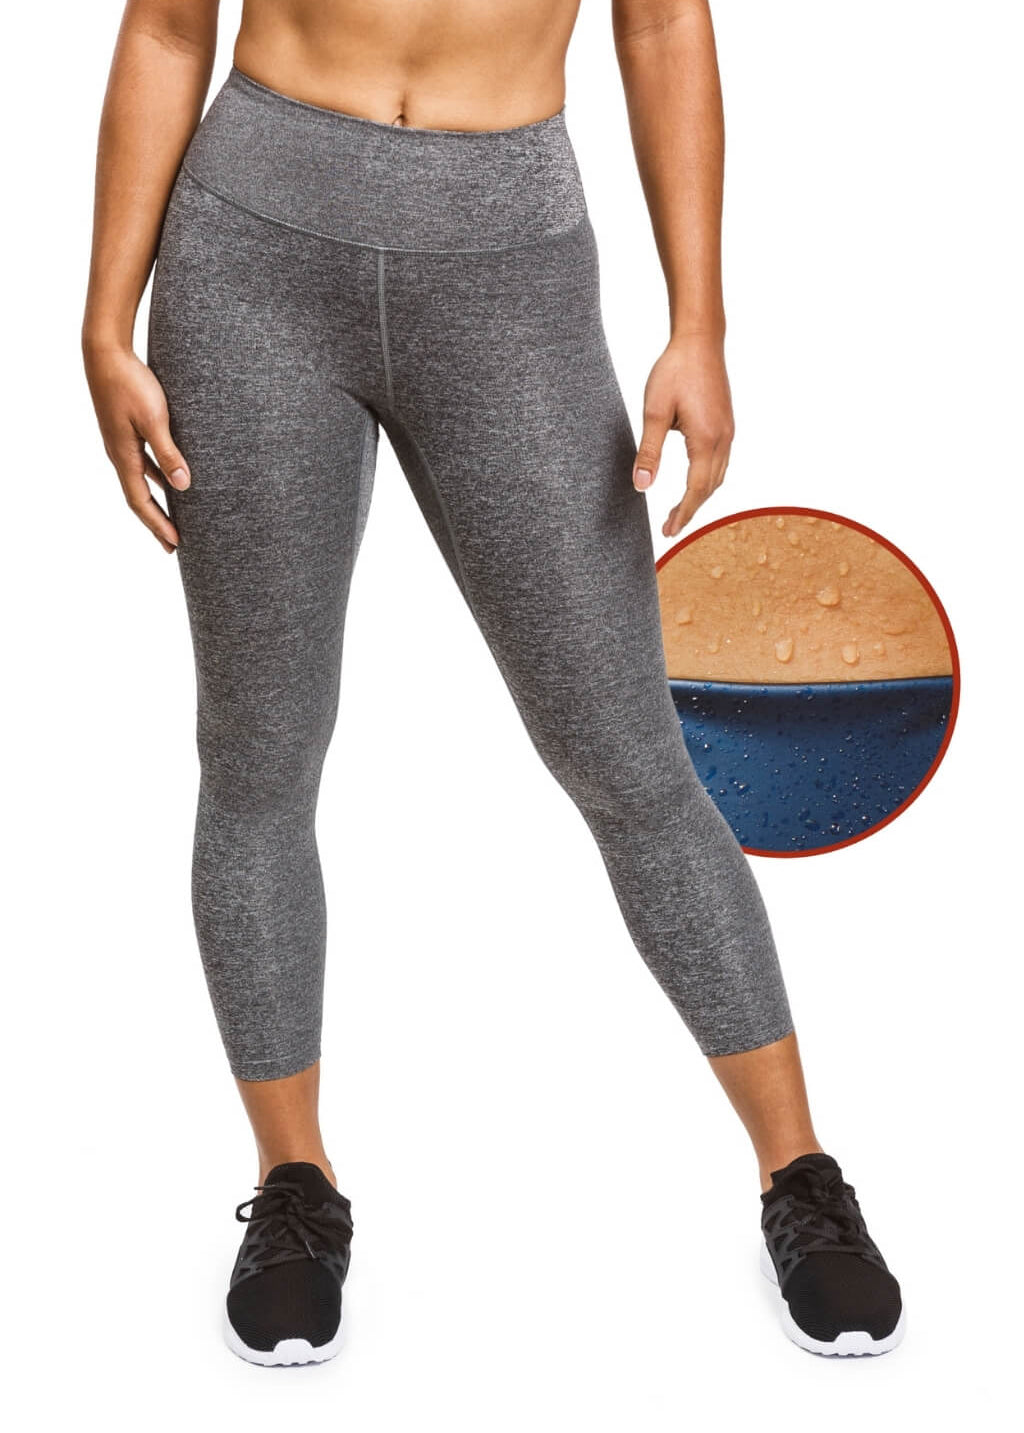 What Goes Good With Grey Leggings? – solowomen